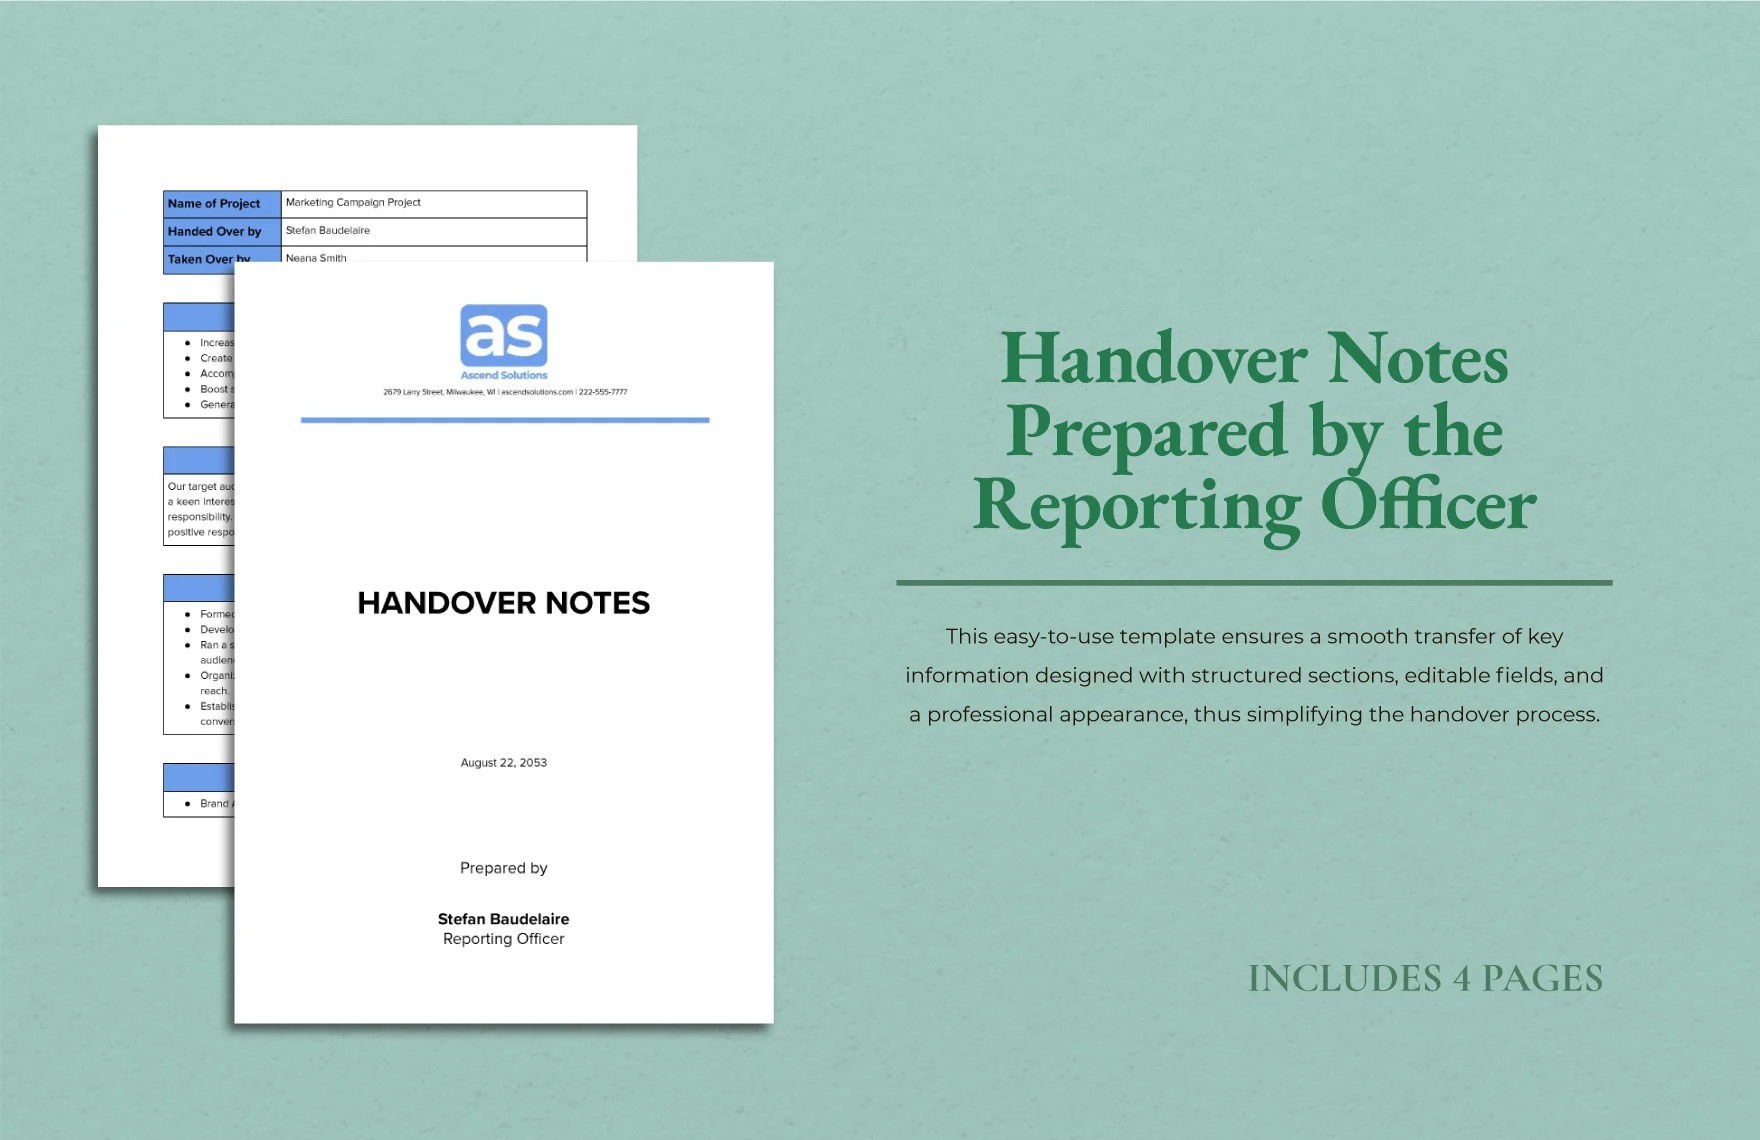 handover notes prepared by the reporting officer